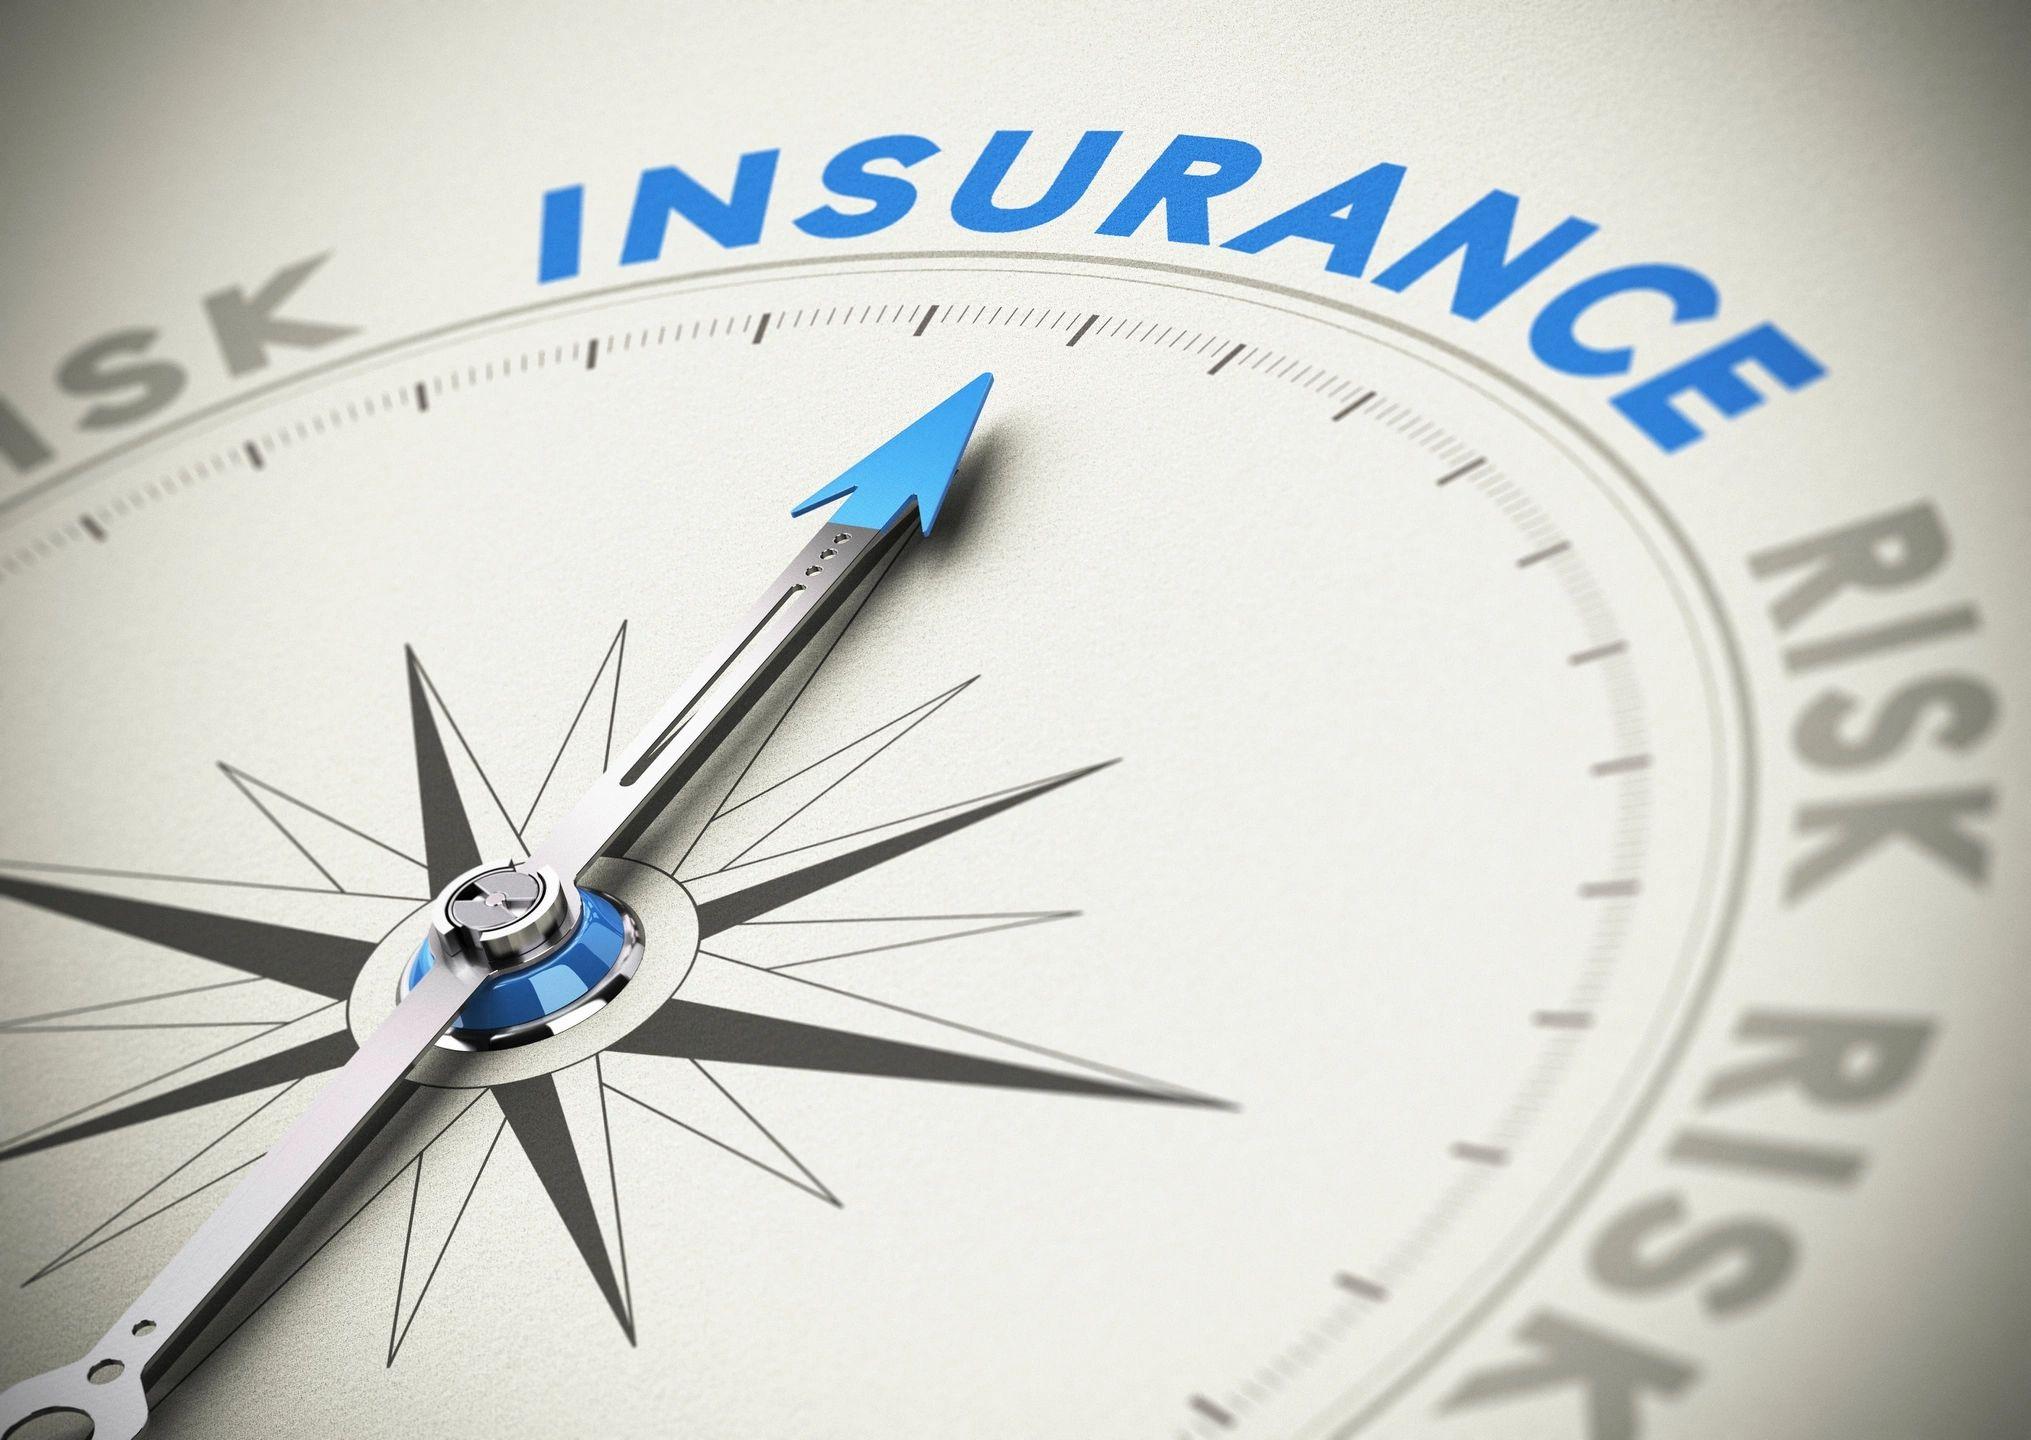 How an IT Service Provider Can Help With Cyber Insurance